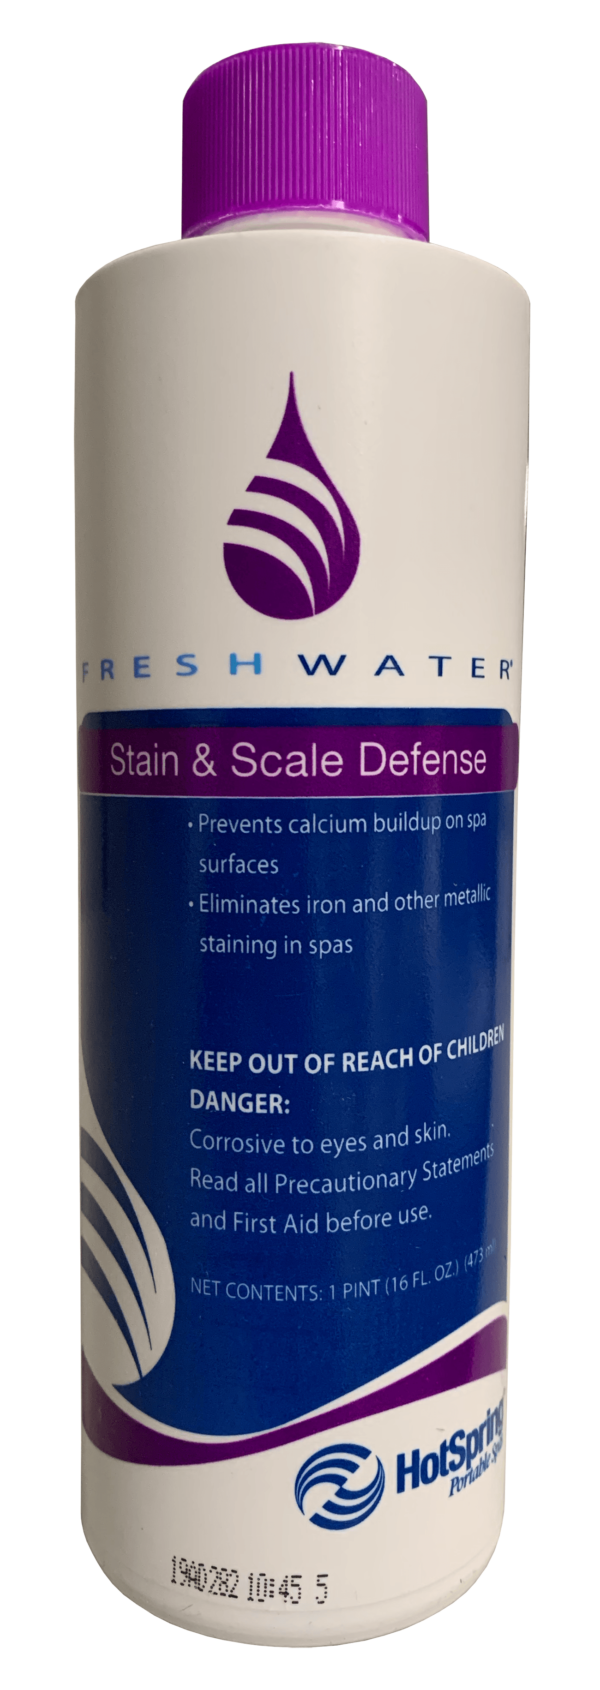 Freshwater Stain And Scale Defense - 16 Oz defense treatment bottle